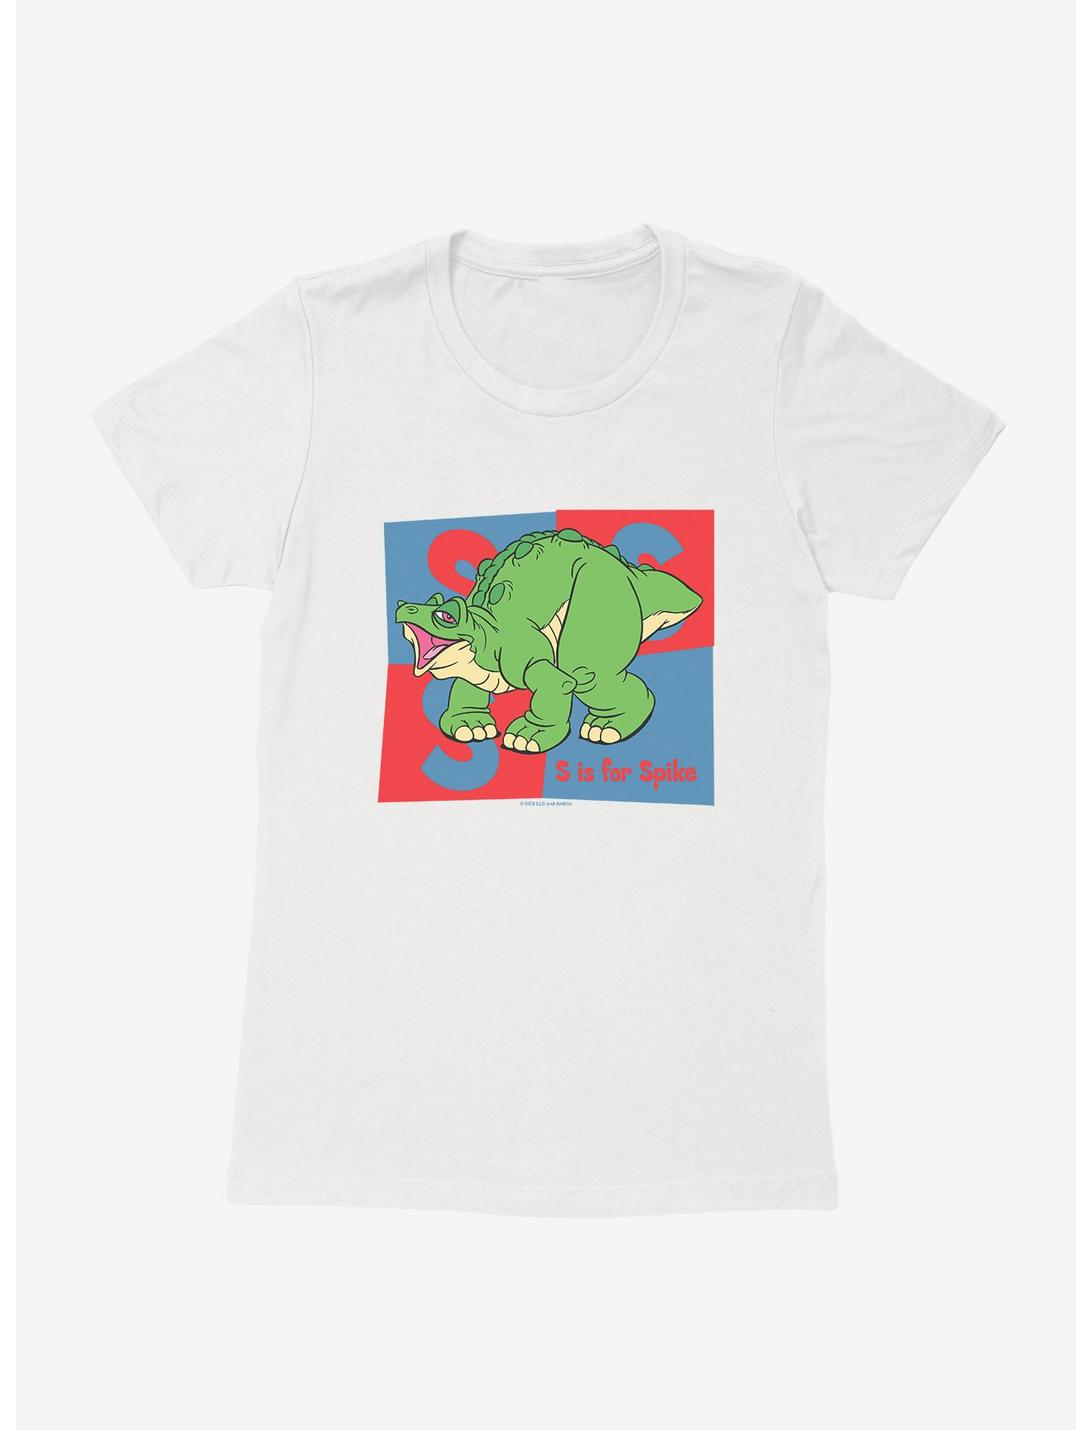 The Land Before Time S Is For Spike Womens T-Shirt, WHITE, hi-res